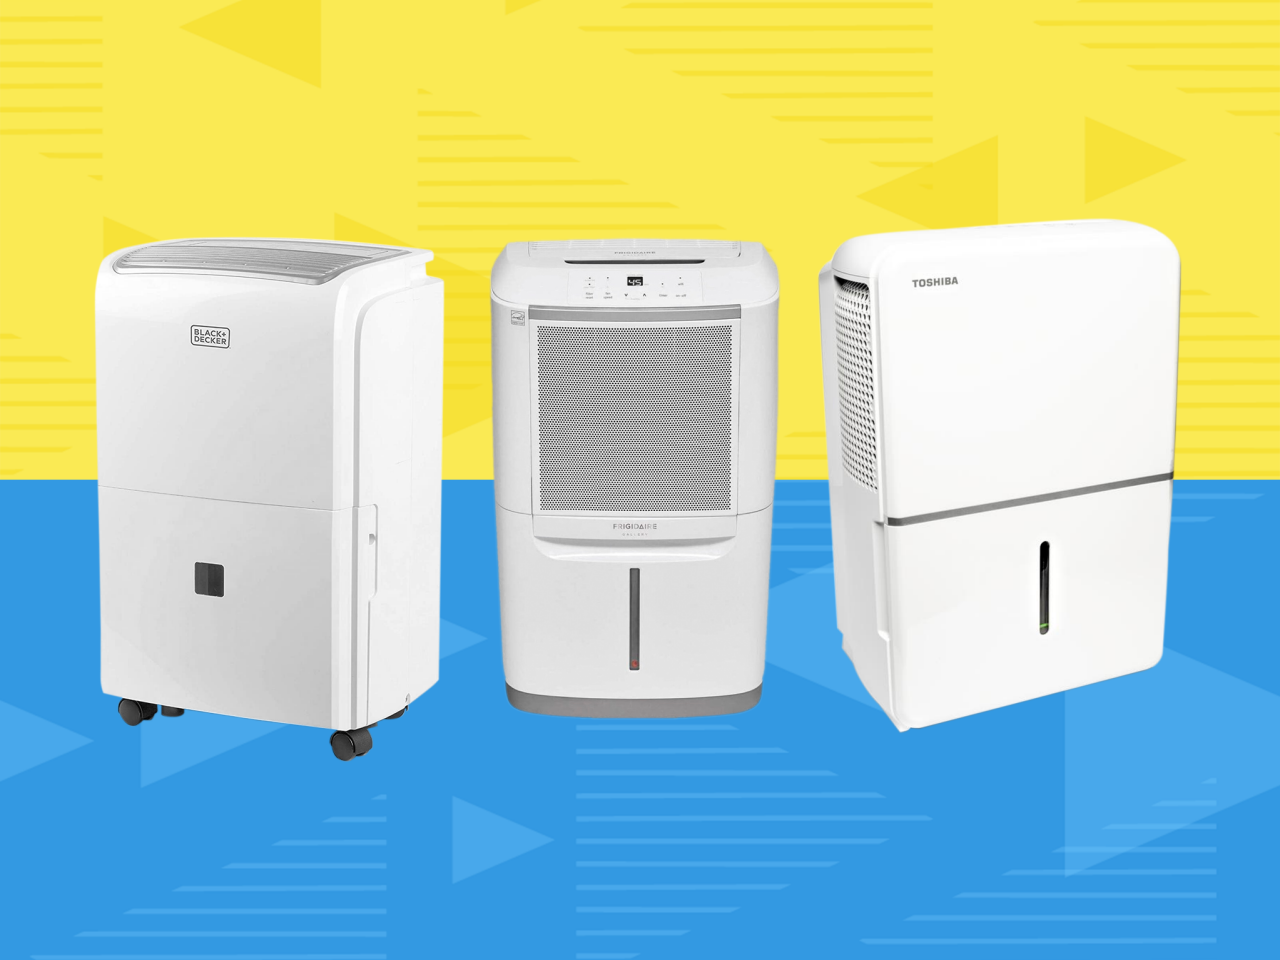 https://hgtvhome.sndimg.com/content/dam/images/hgtv/products/2022/3/24/3/Original_Product-Testing_Dehumidifiers.png.rend.hgtvcom.1280.960.suffix/1648140002393.png